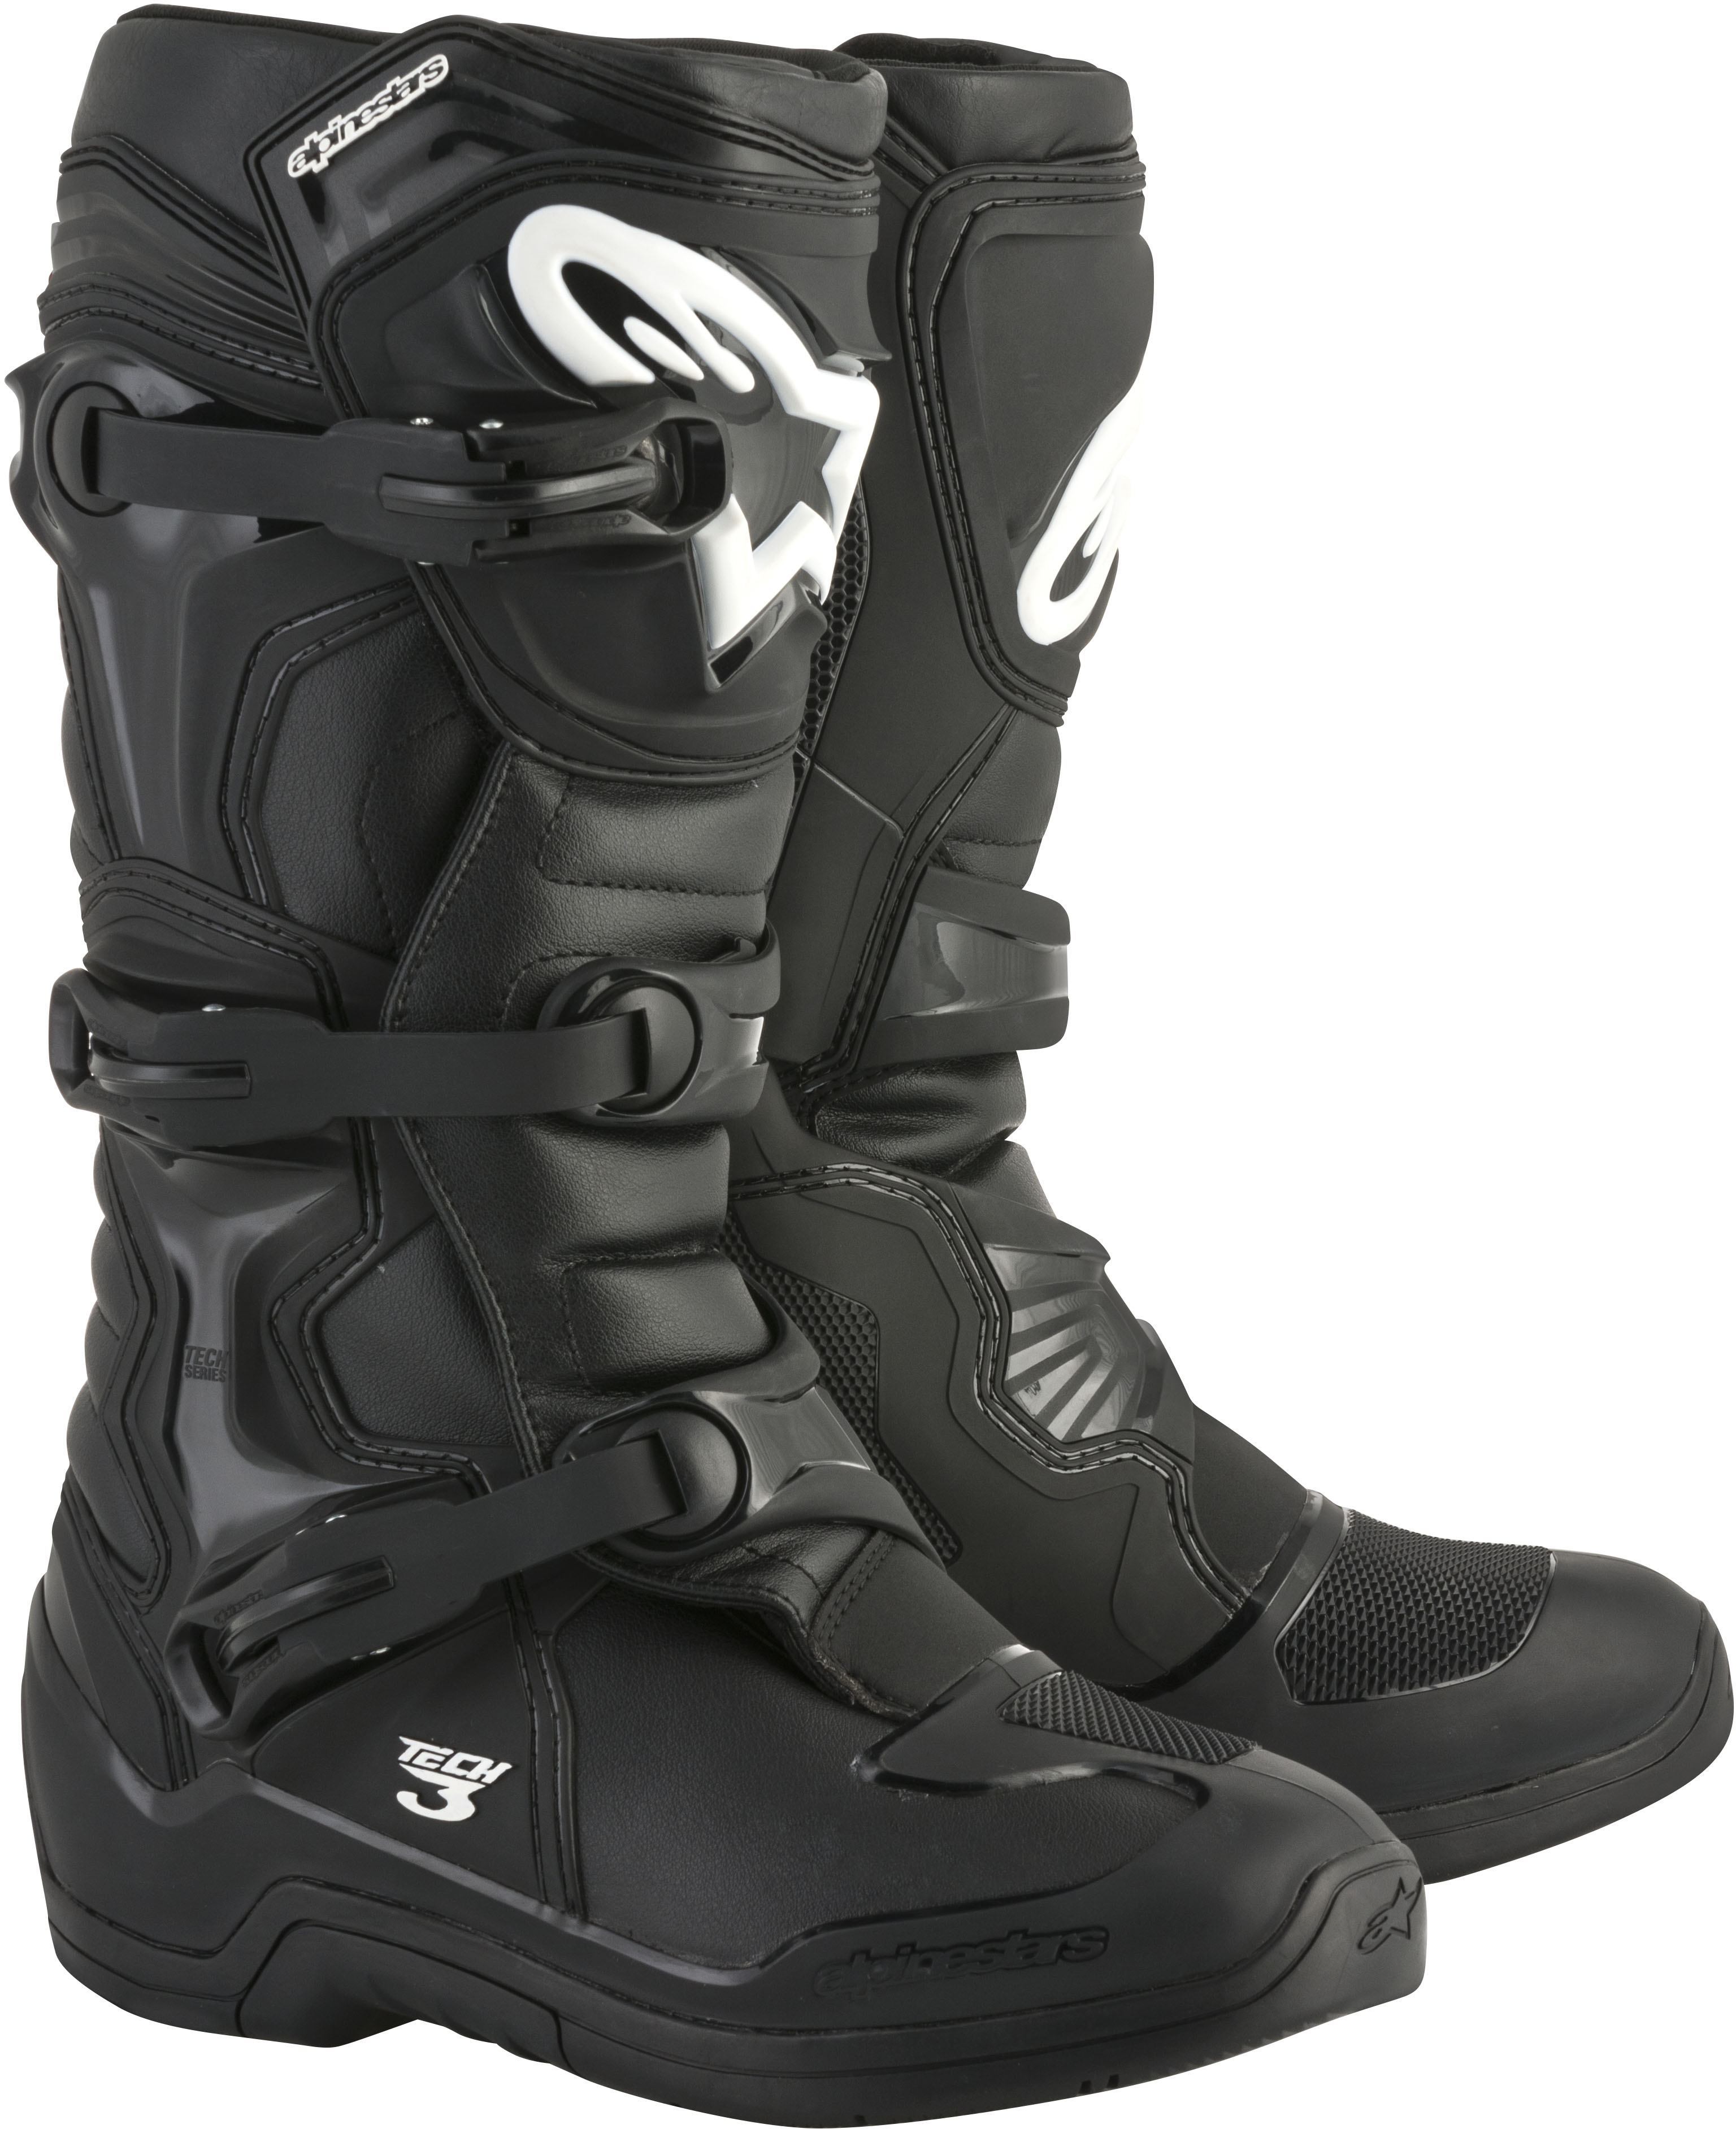 Tech 3 Boots Black Size 16 - Click Image to Close